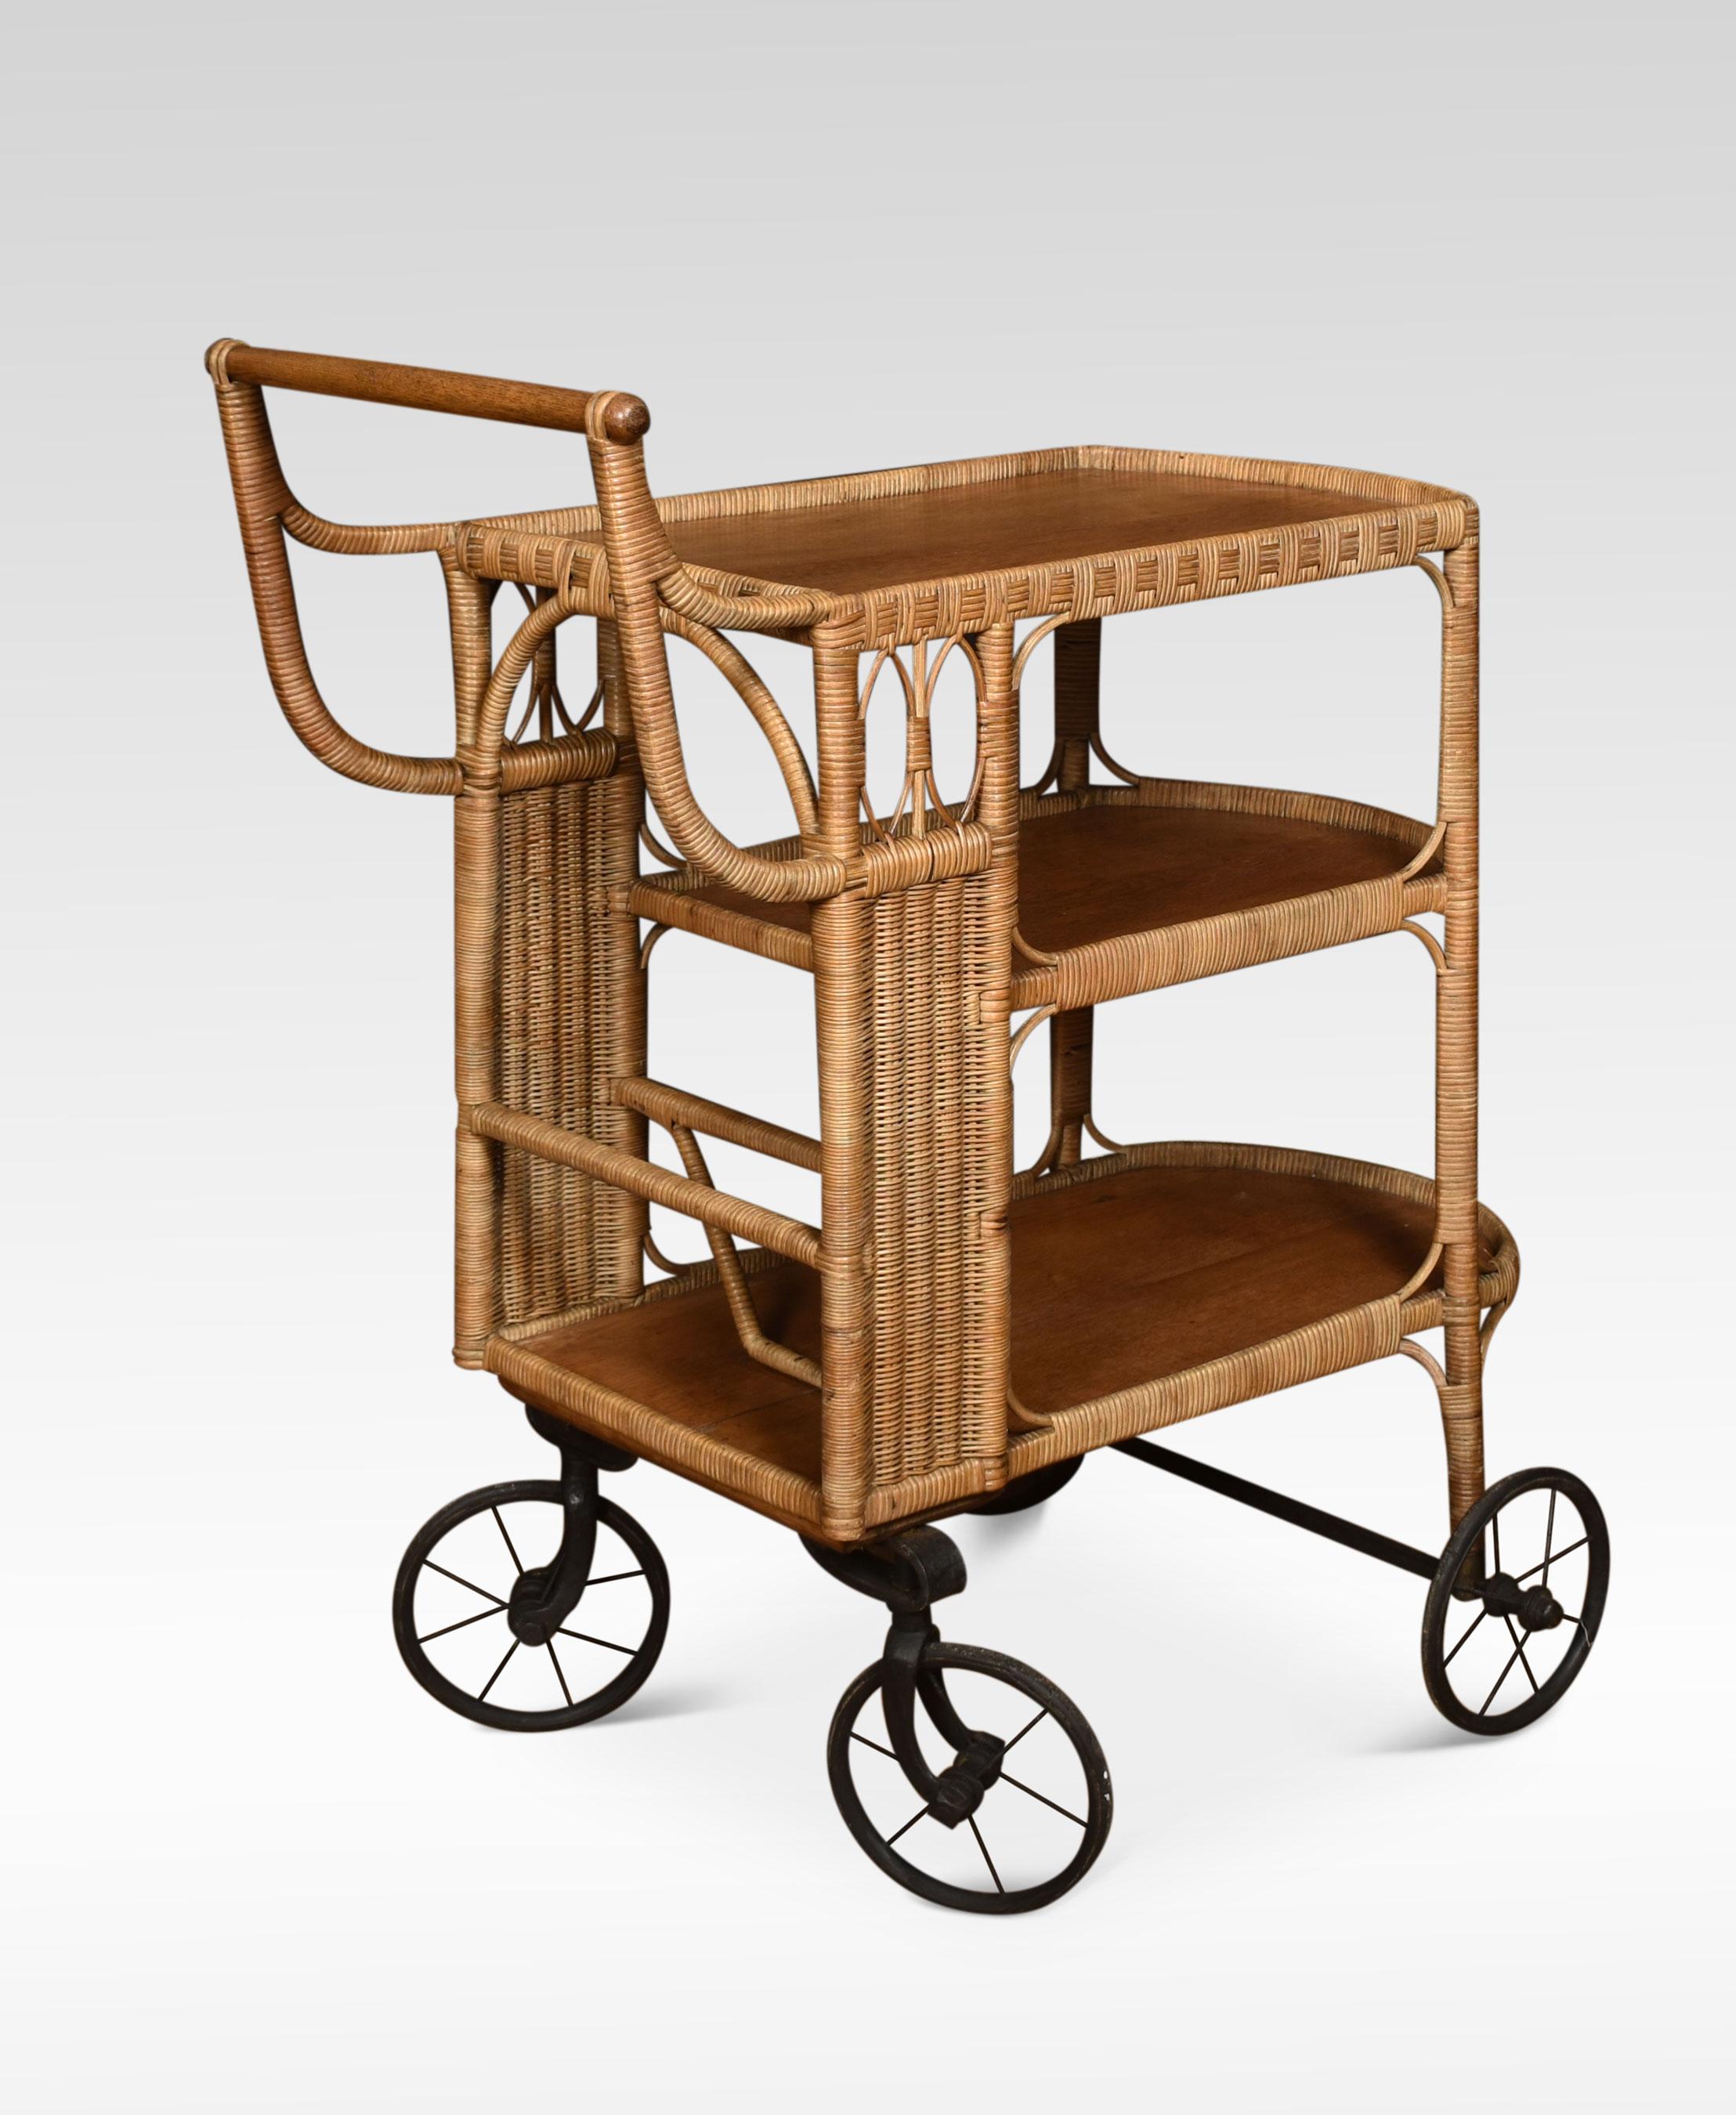 Rattan cane and oak drinks cart or drinks trolley. Featuring a three-tiered body with decorative accents – the top tier with a gallery and handle over two further tiers with inset oak shelves all raised up on four spoked wheels.
Dimensions:
Height